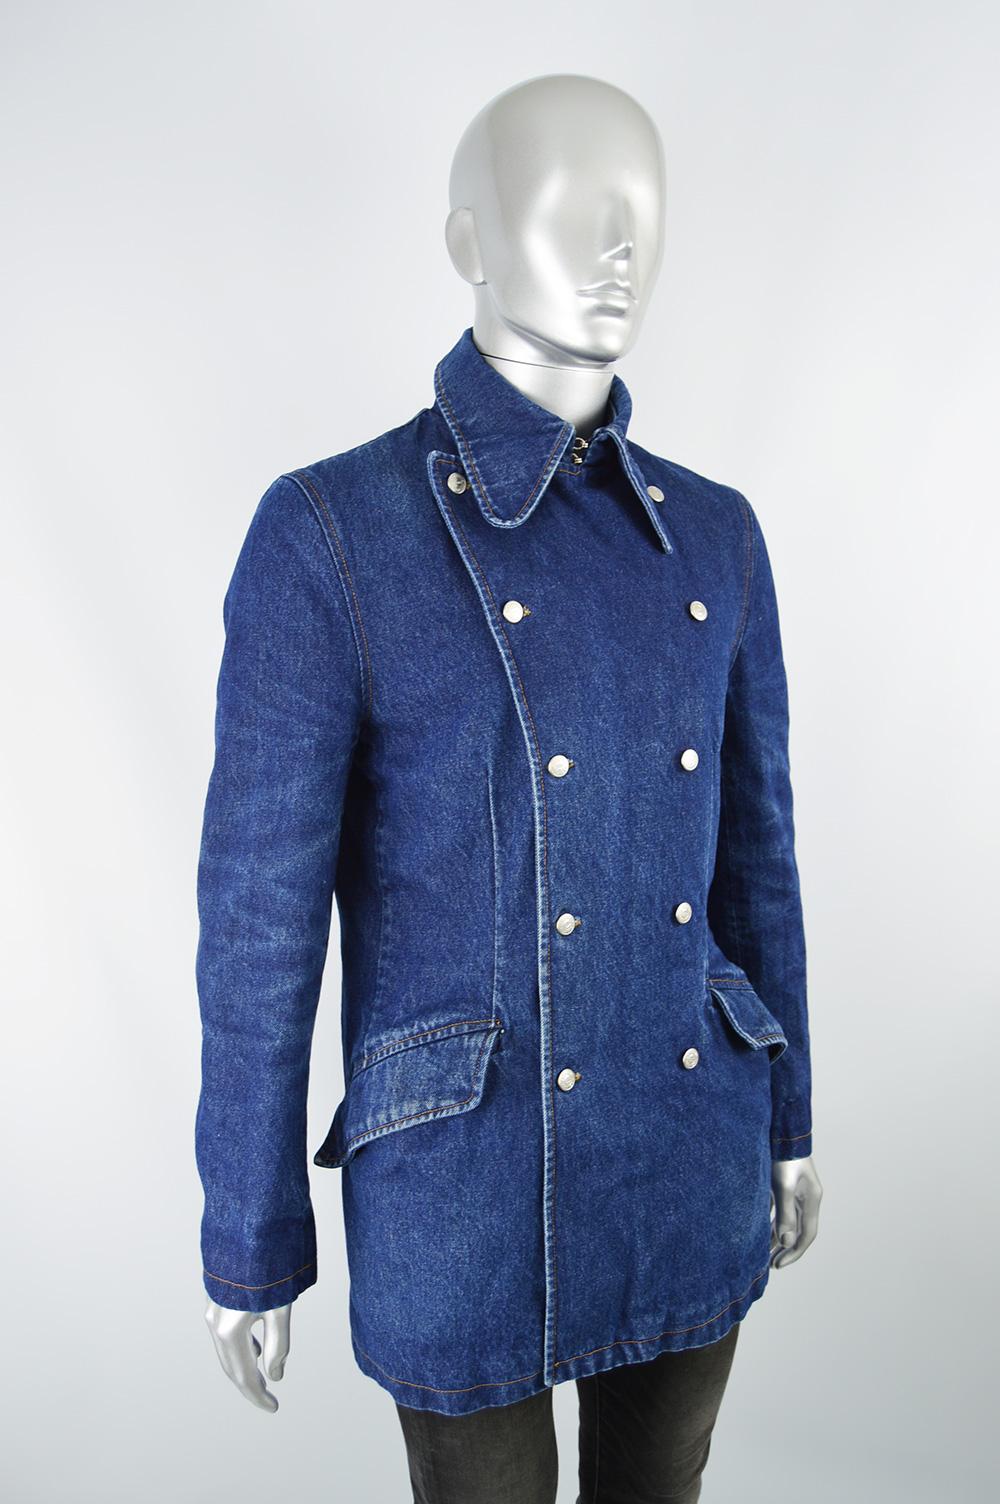 Katharine Hamnett Men's Vintage Double Breasted Blue Denim Pea Coat, 1990s In Good Condition For Sale In Doncaster, South Yorkshire